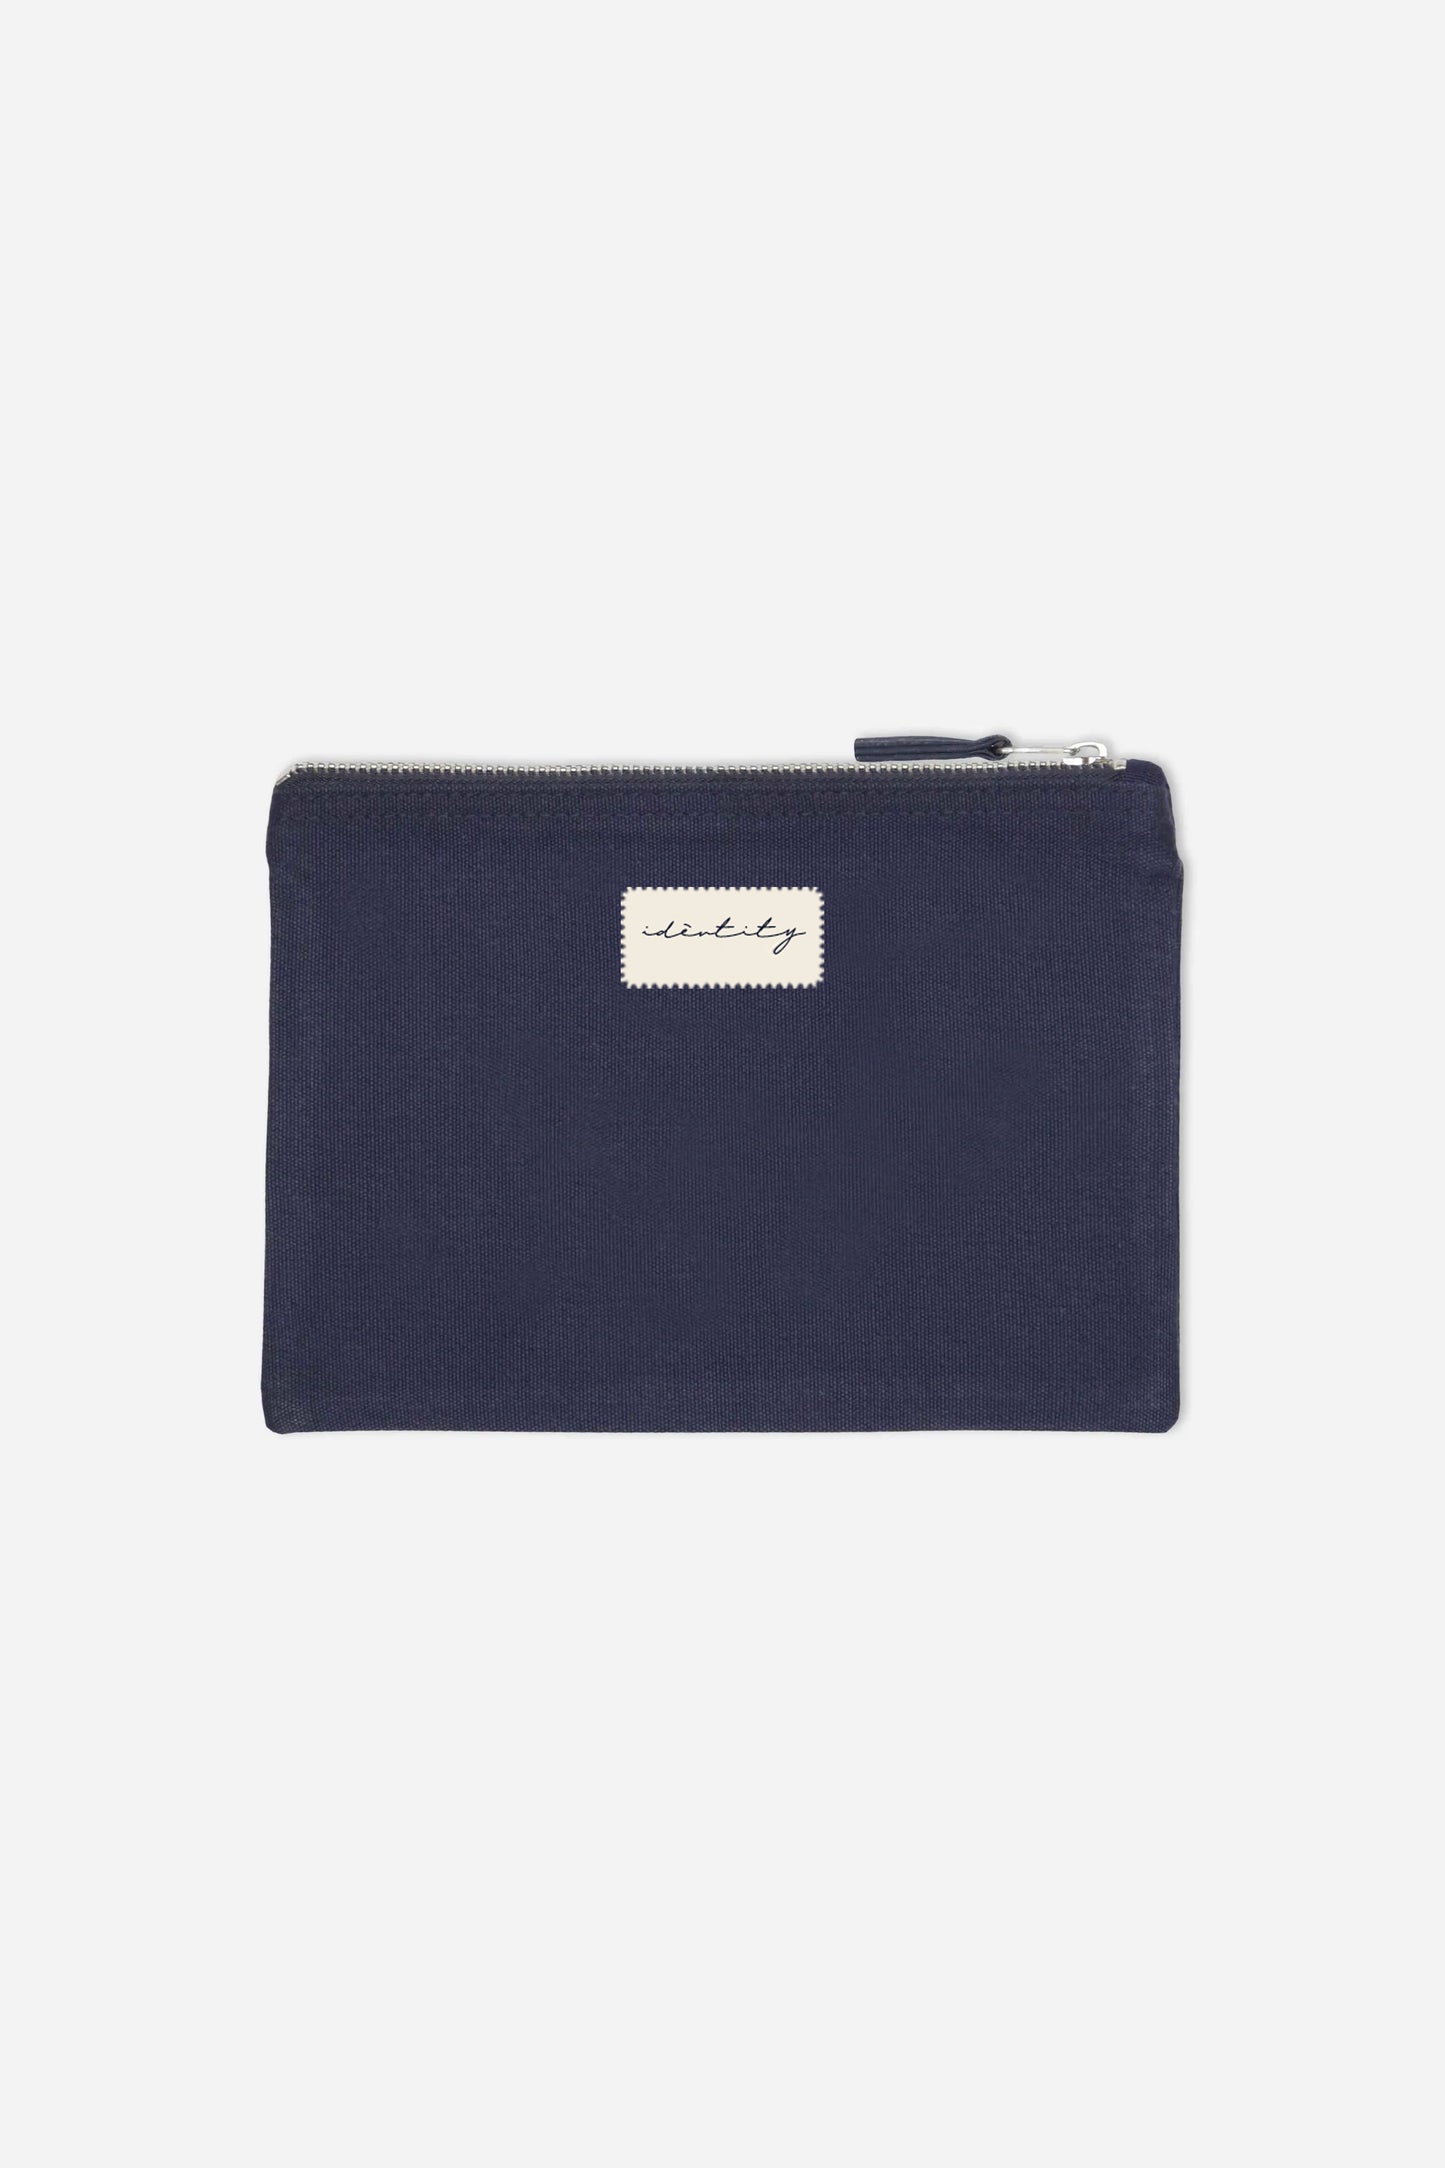 Pouch Bag - Navy